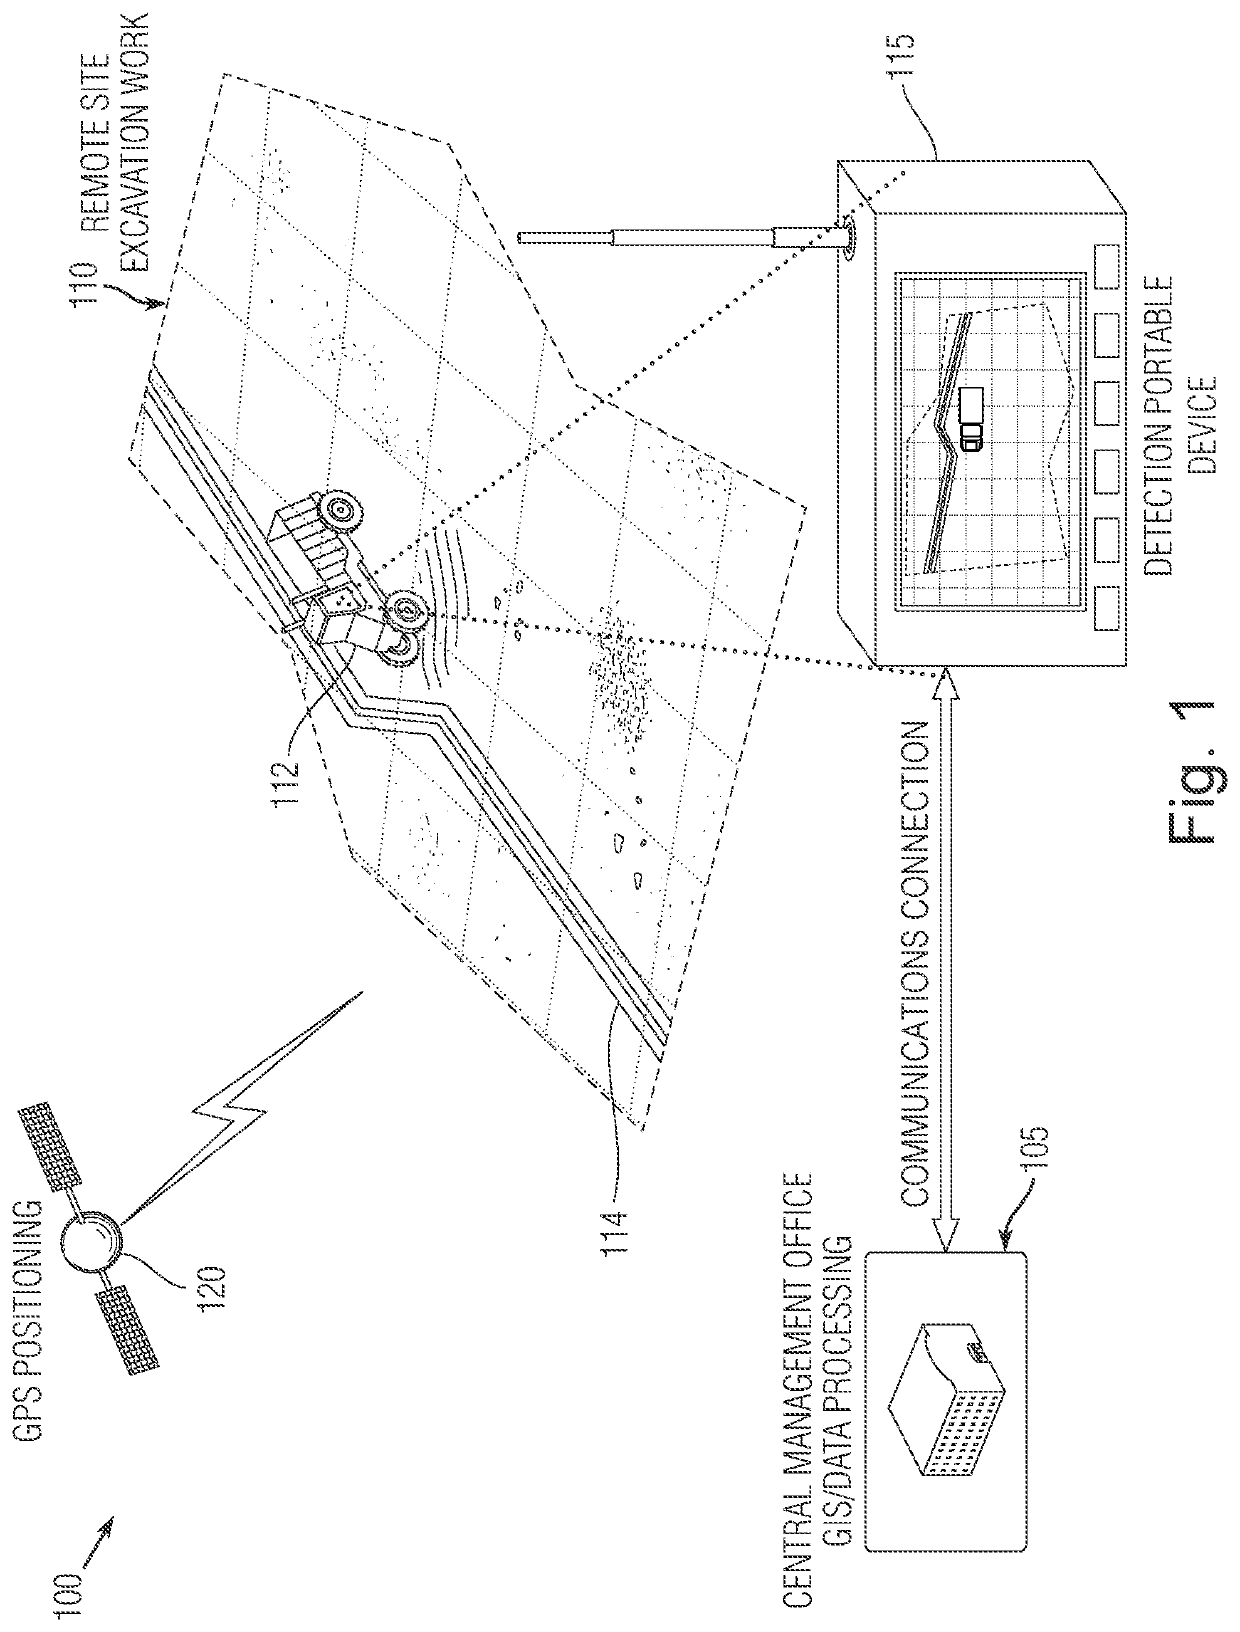 Systems and methods for preventing damage to unseen utility assets